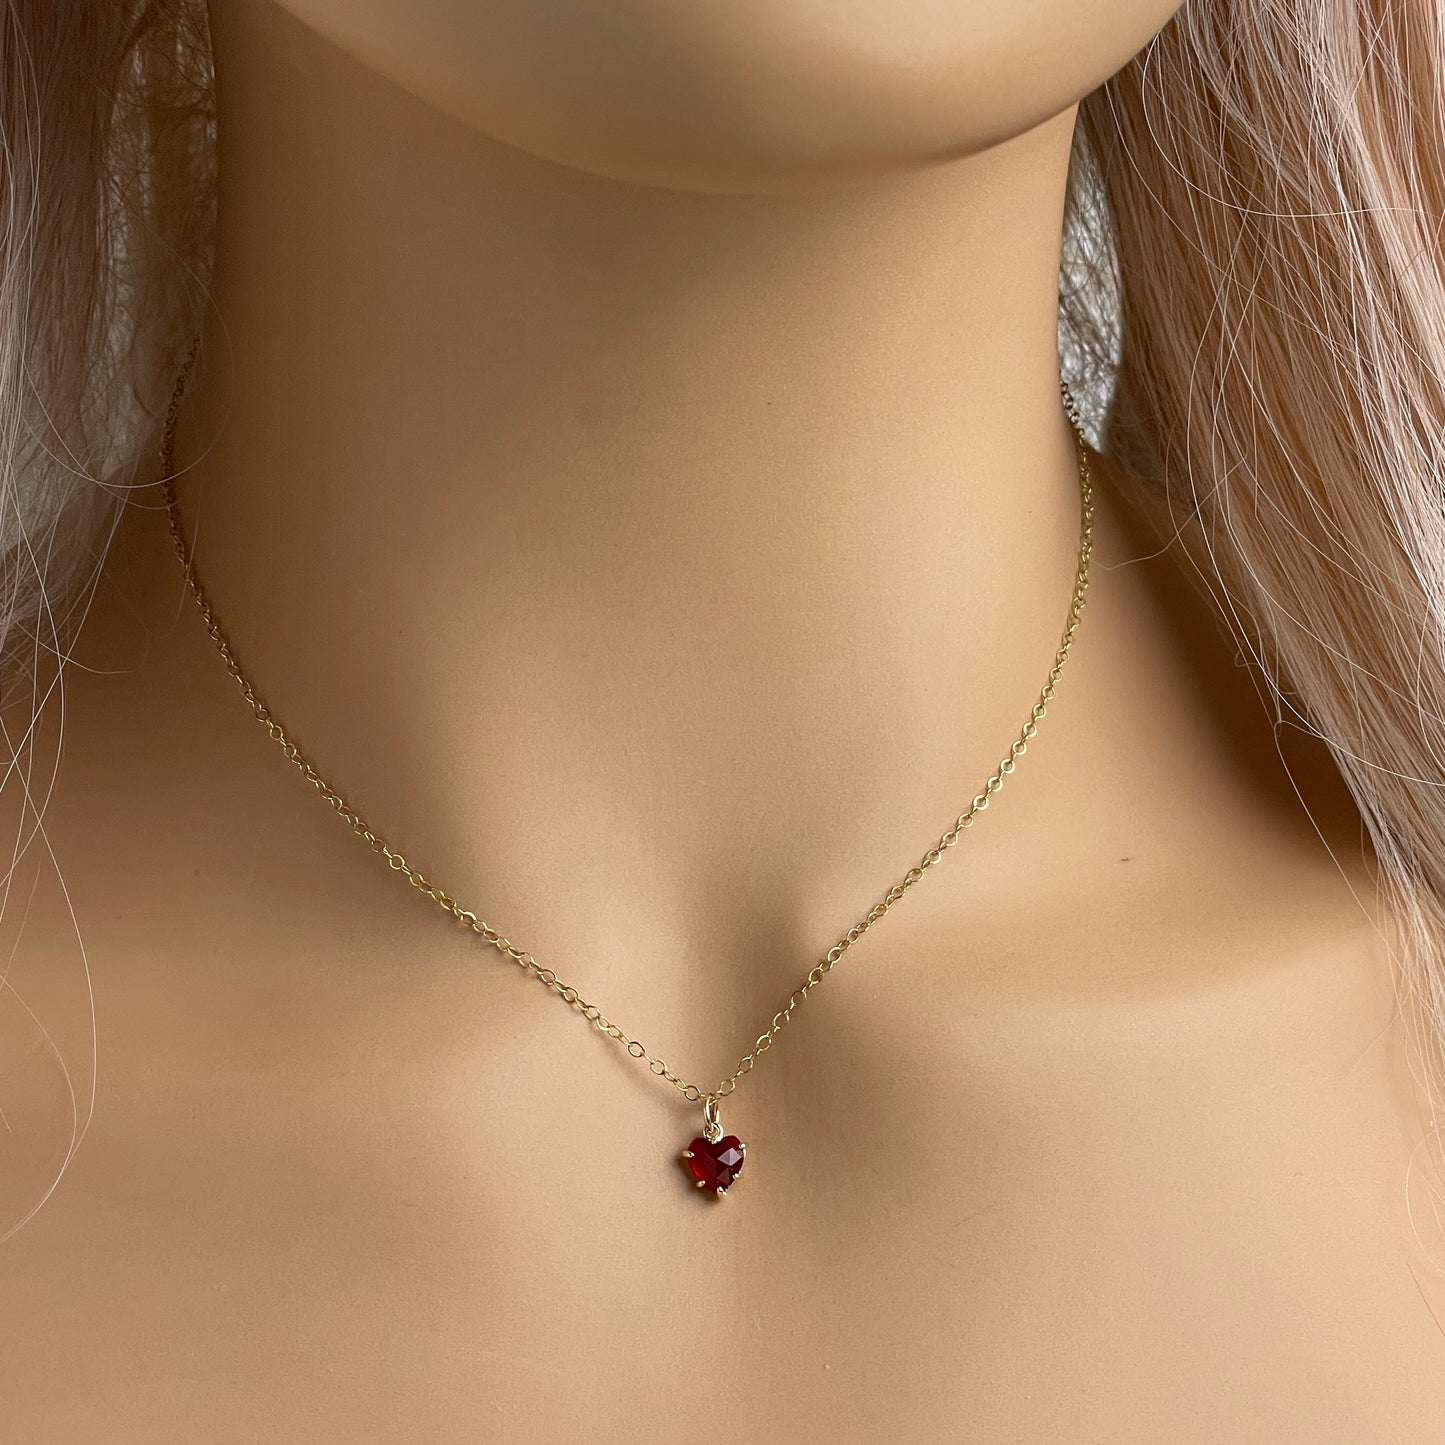 Tiny Red Heart Necklace Gold Cubic Zirconia Crystal on Gold Chain, Gift For Mom, M6-25